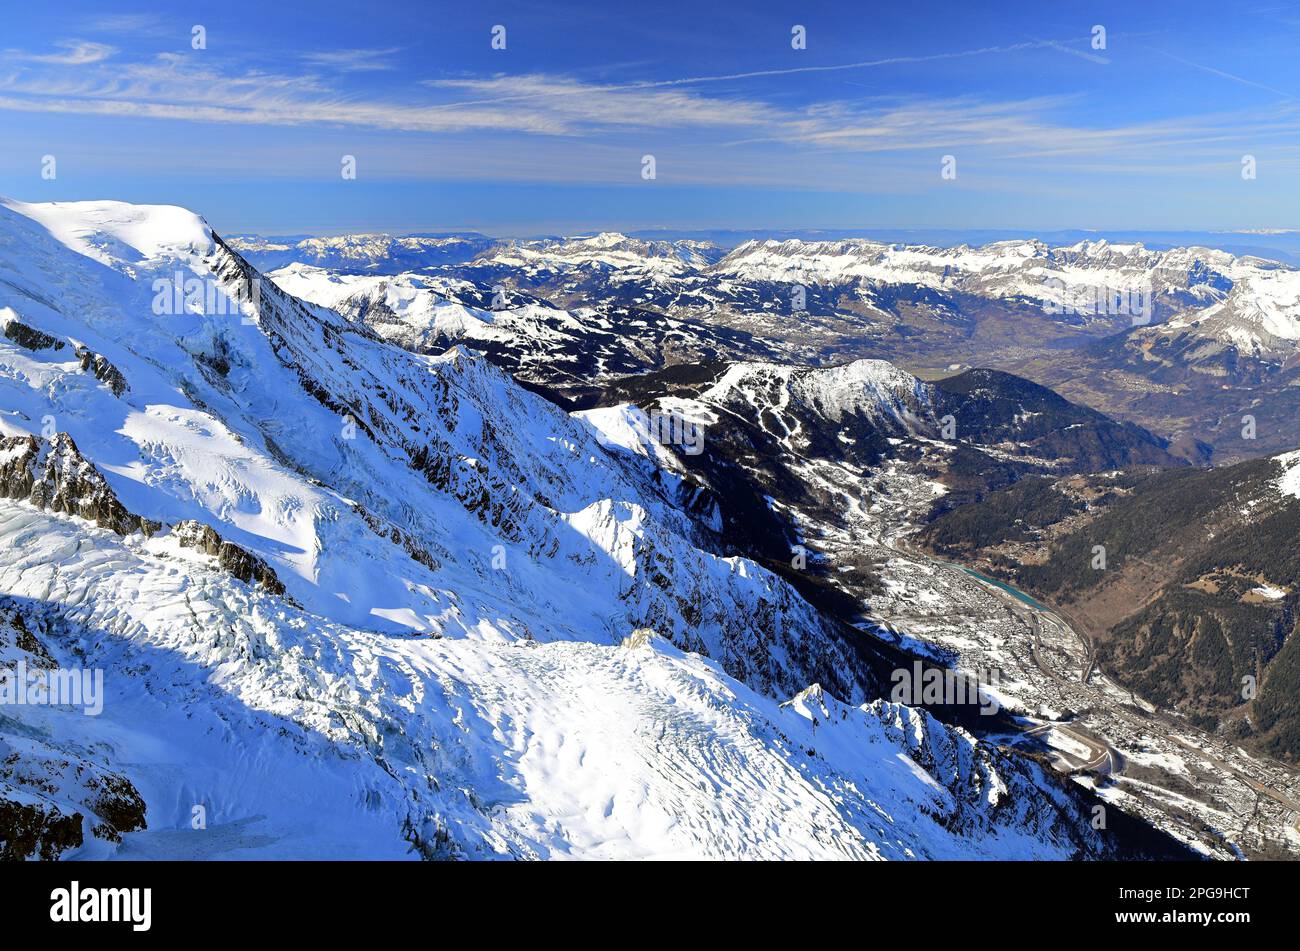 View of the city of Chamonix seen from the Aiguille du Midi. French Alps, Europe. Stock Photo